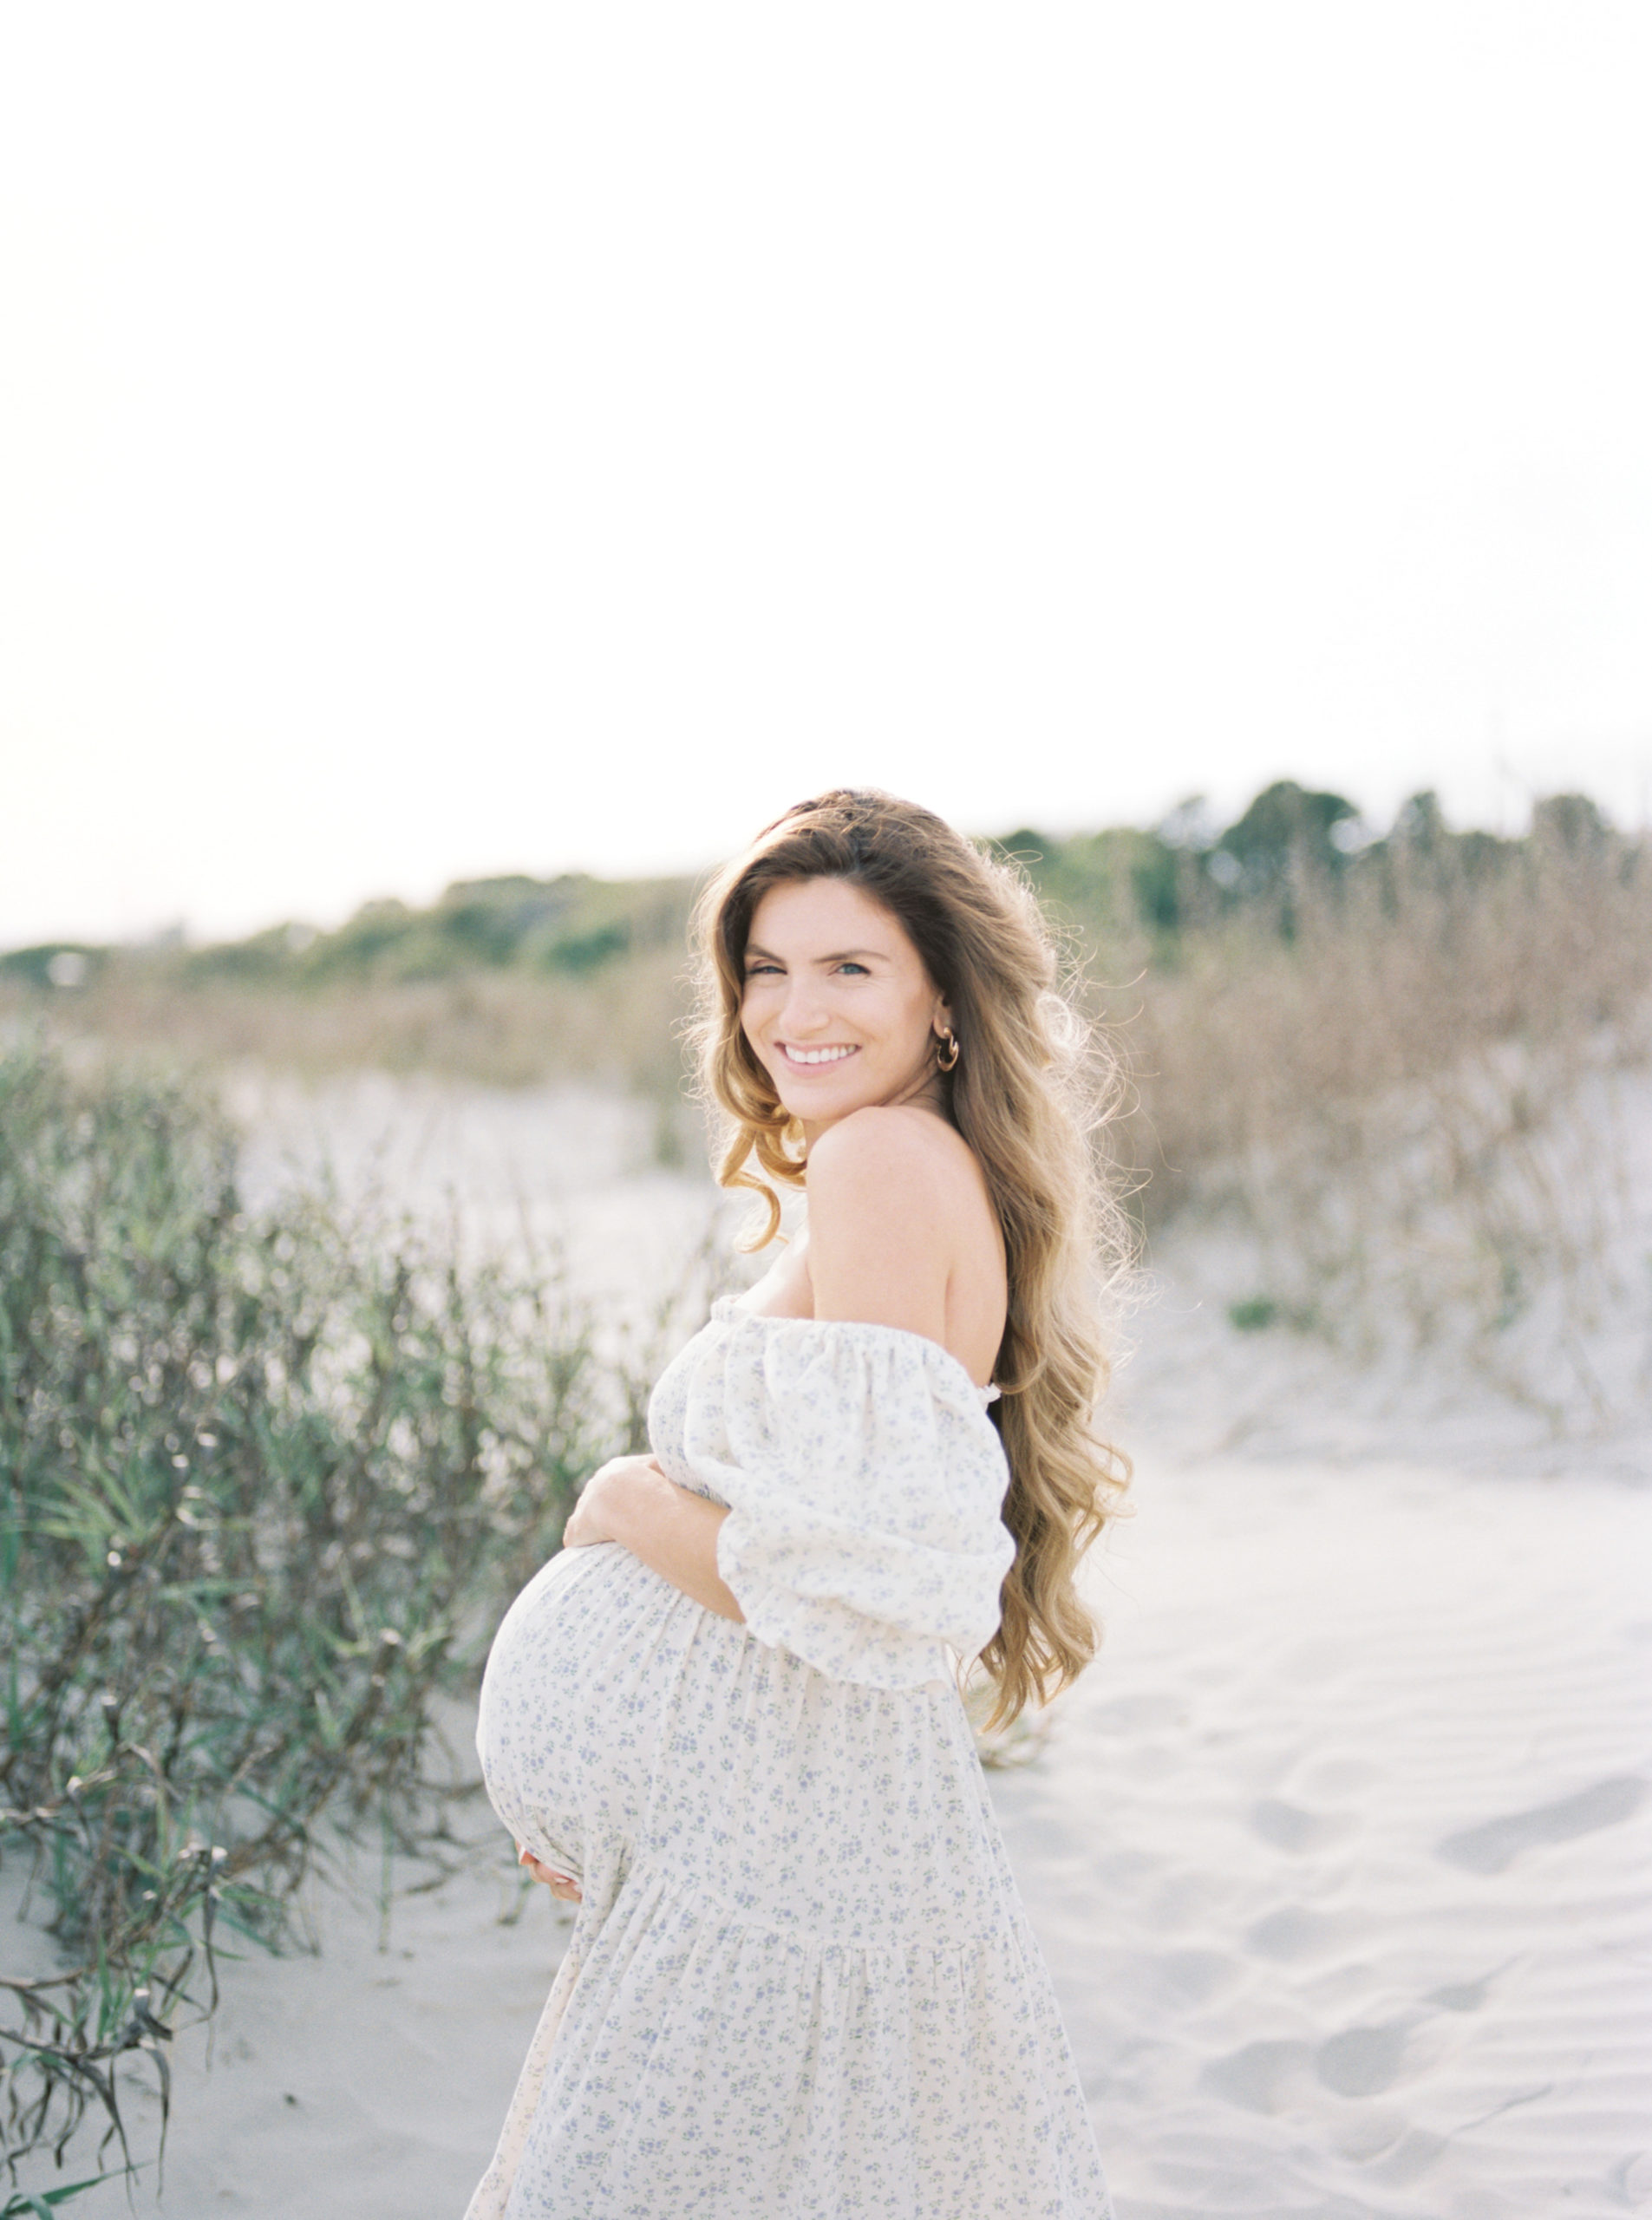 A guide to intimate motherhood maternity sessions